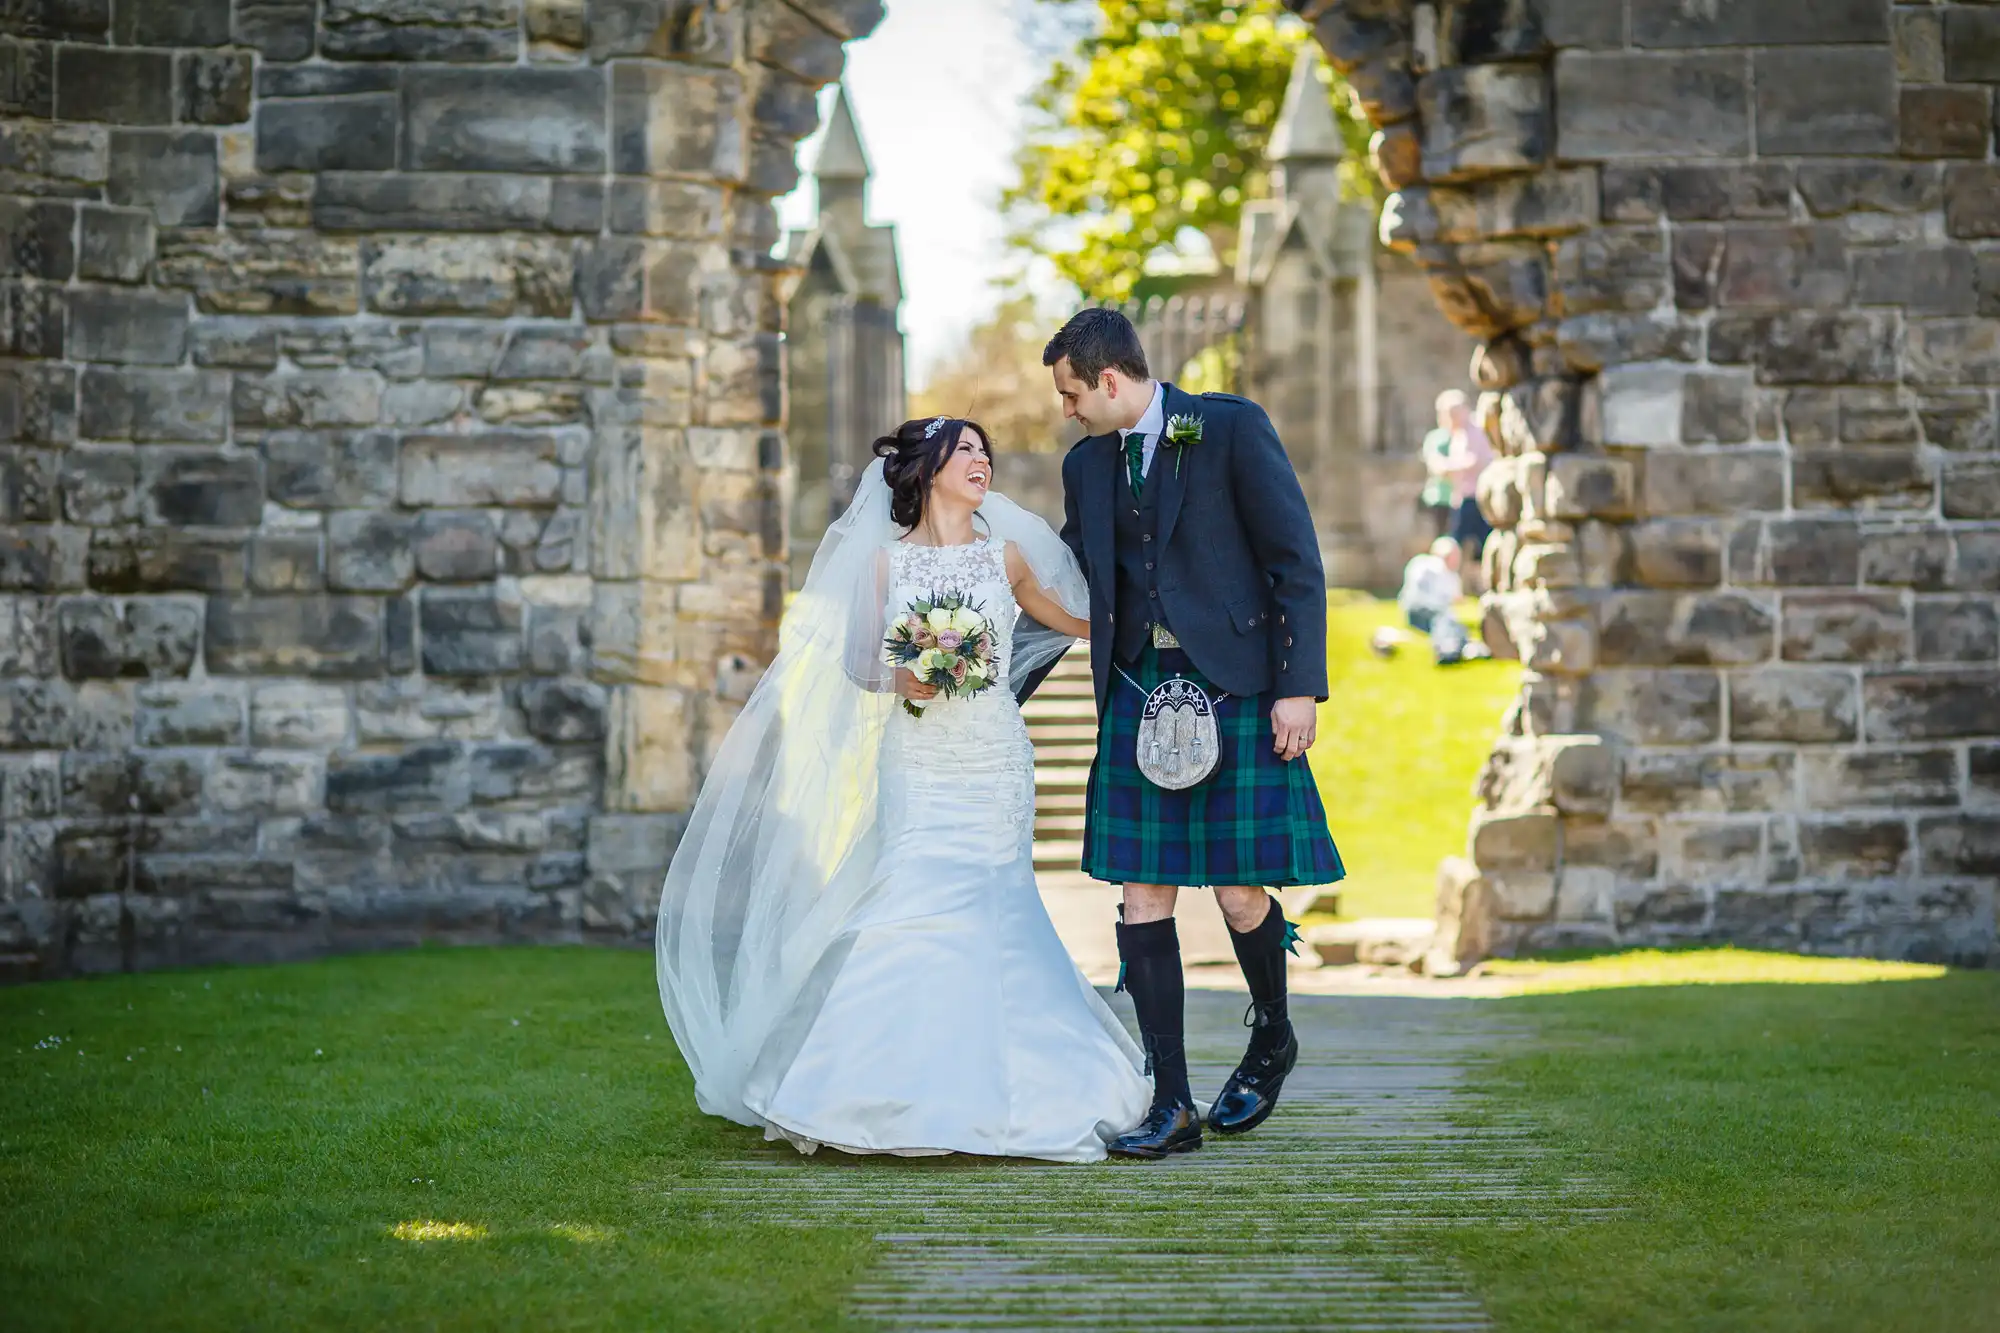 Bride in a white dress and groom in a tartan kilt smiling at each other on a grassy path, with historical stone arches in the background.